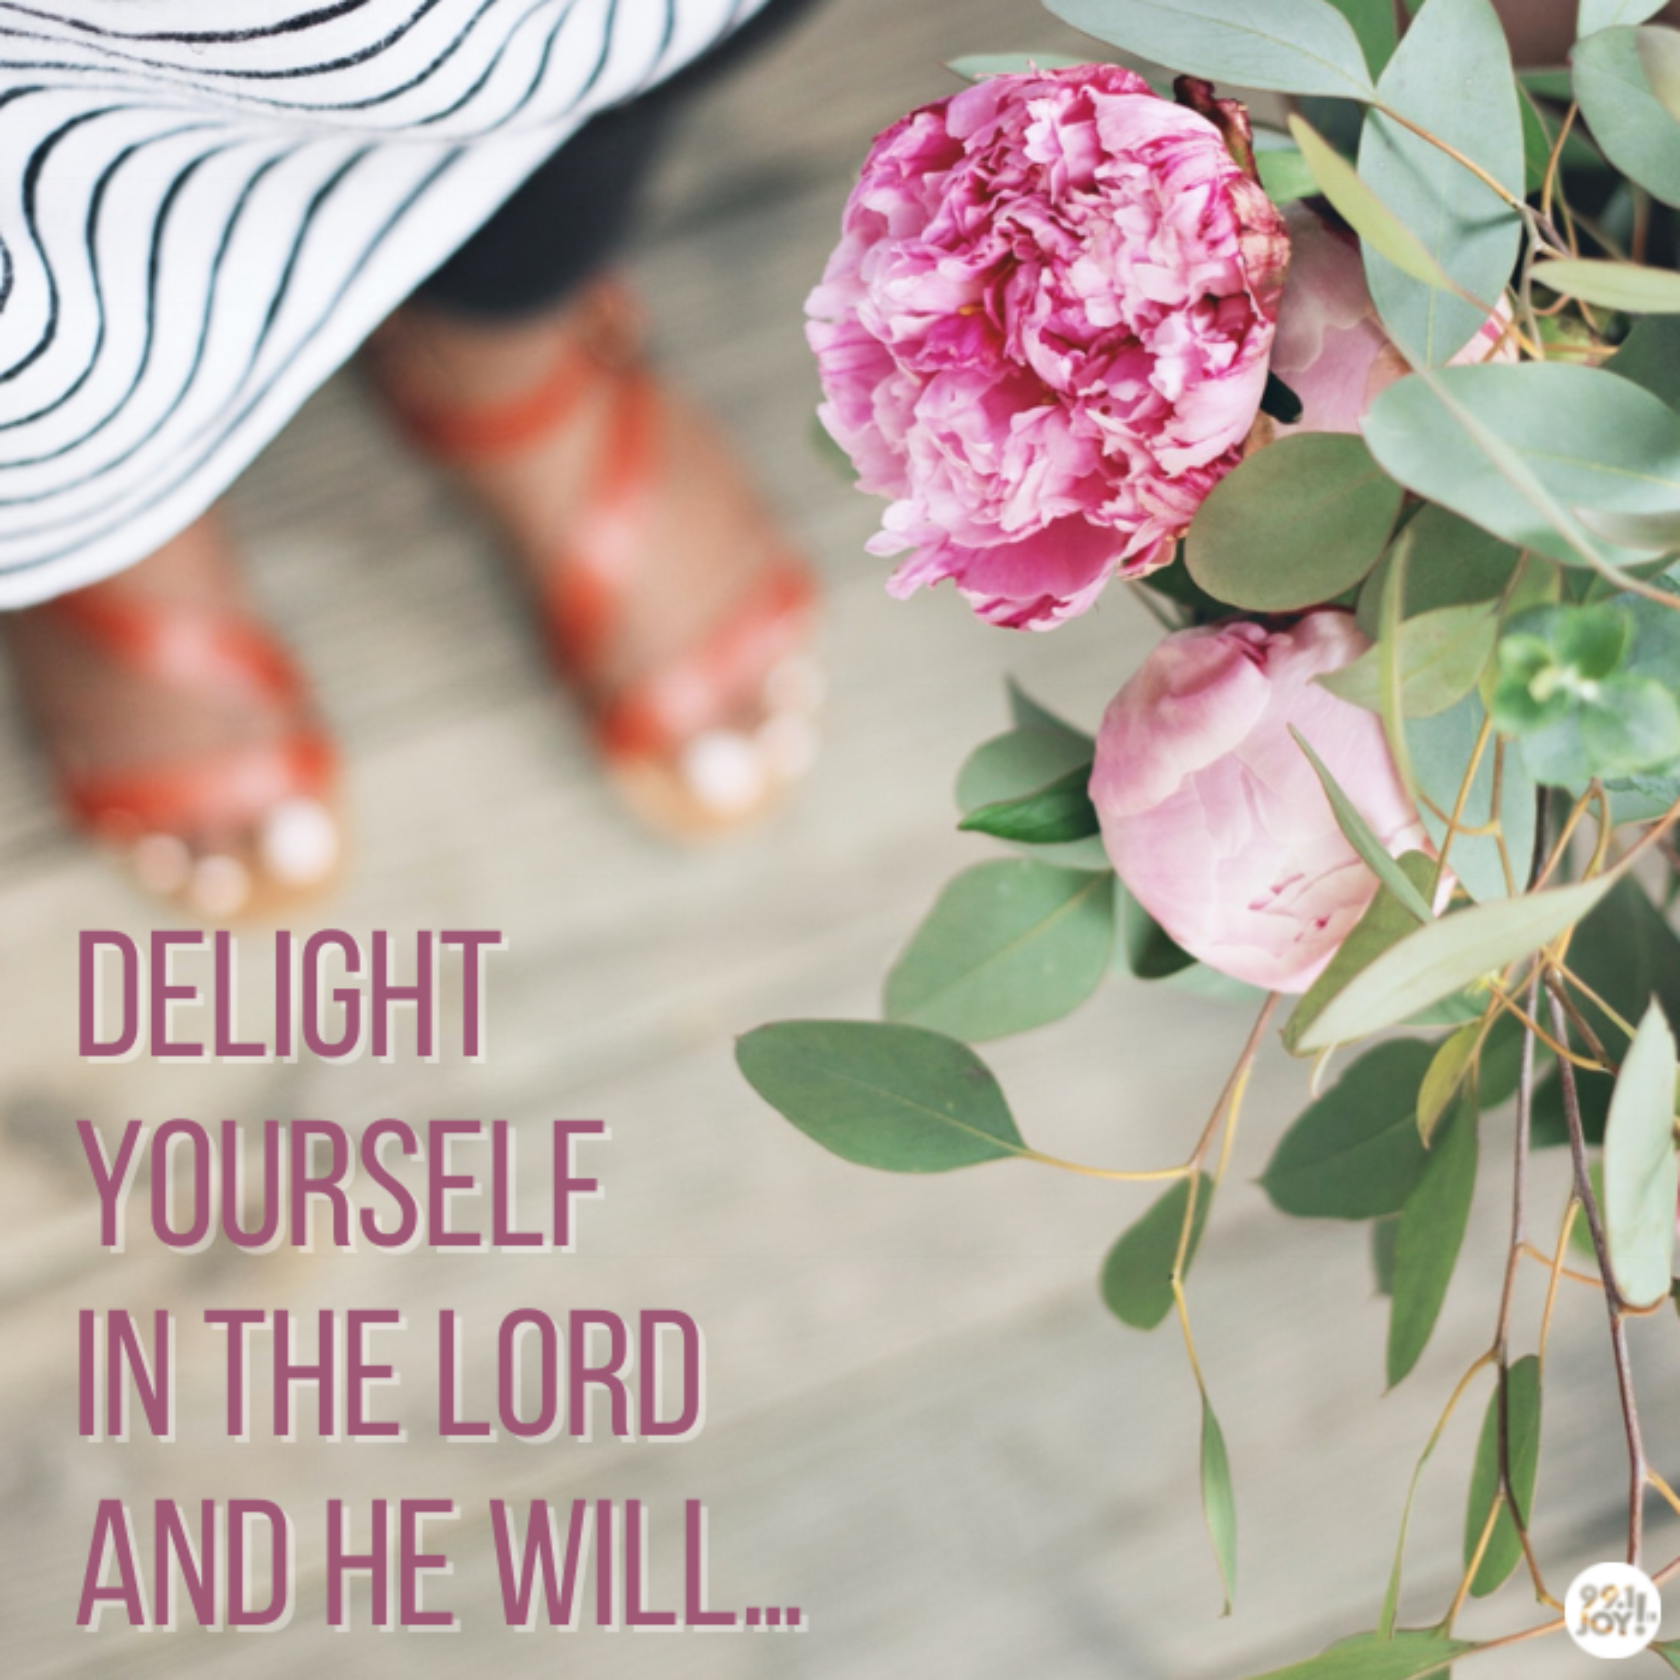 Delight Yourself In The Lord And He Will…